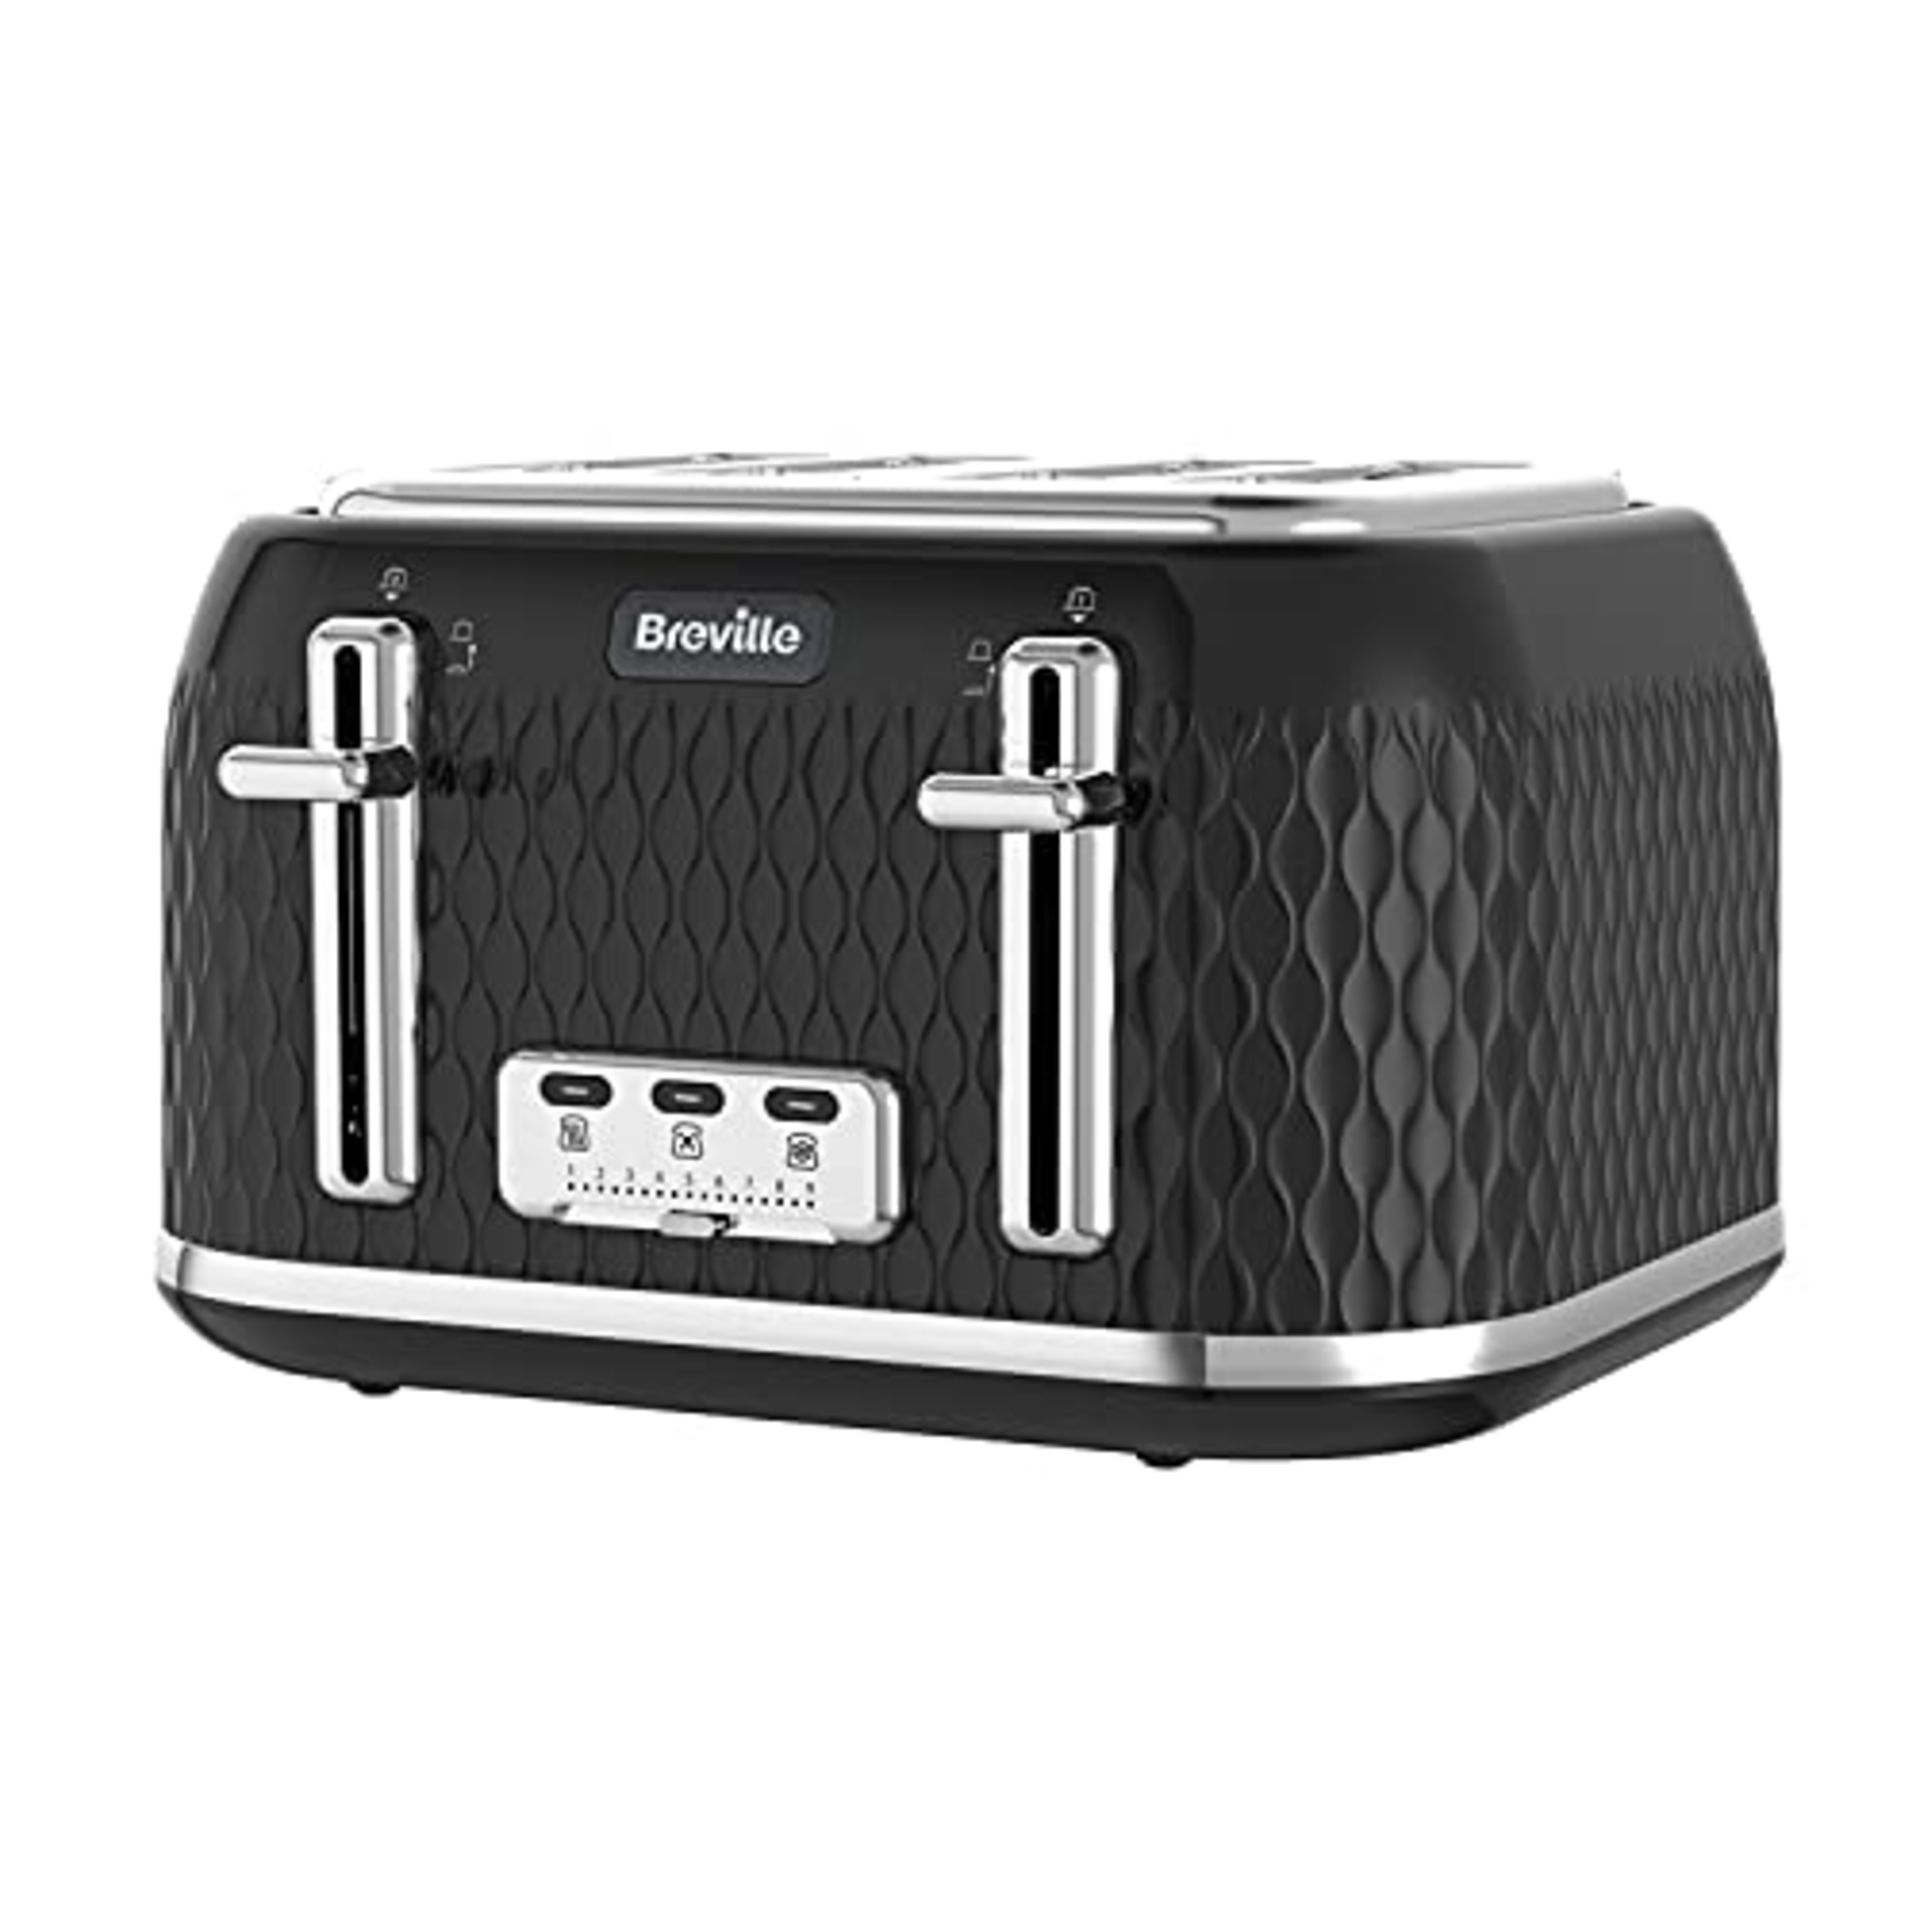 Breville Curve 4-Slice Toaster with High Lift and Wide Slots | Black & Chrome [VTT786]